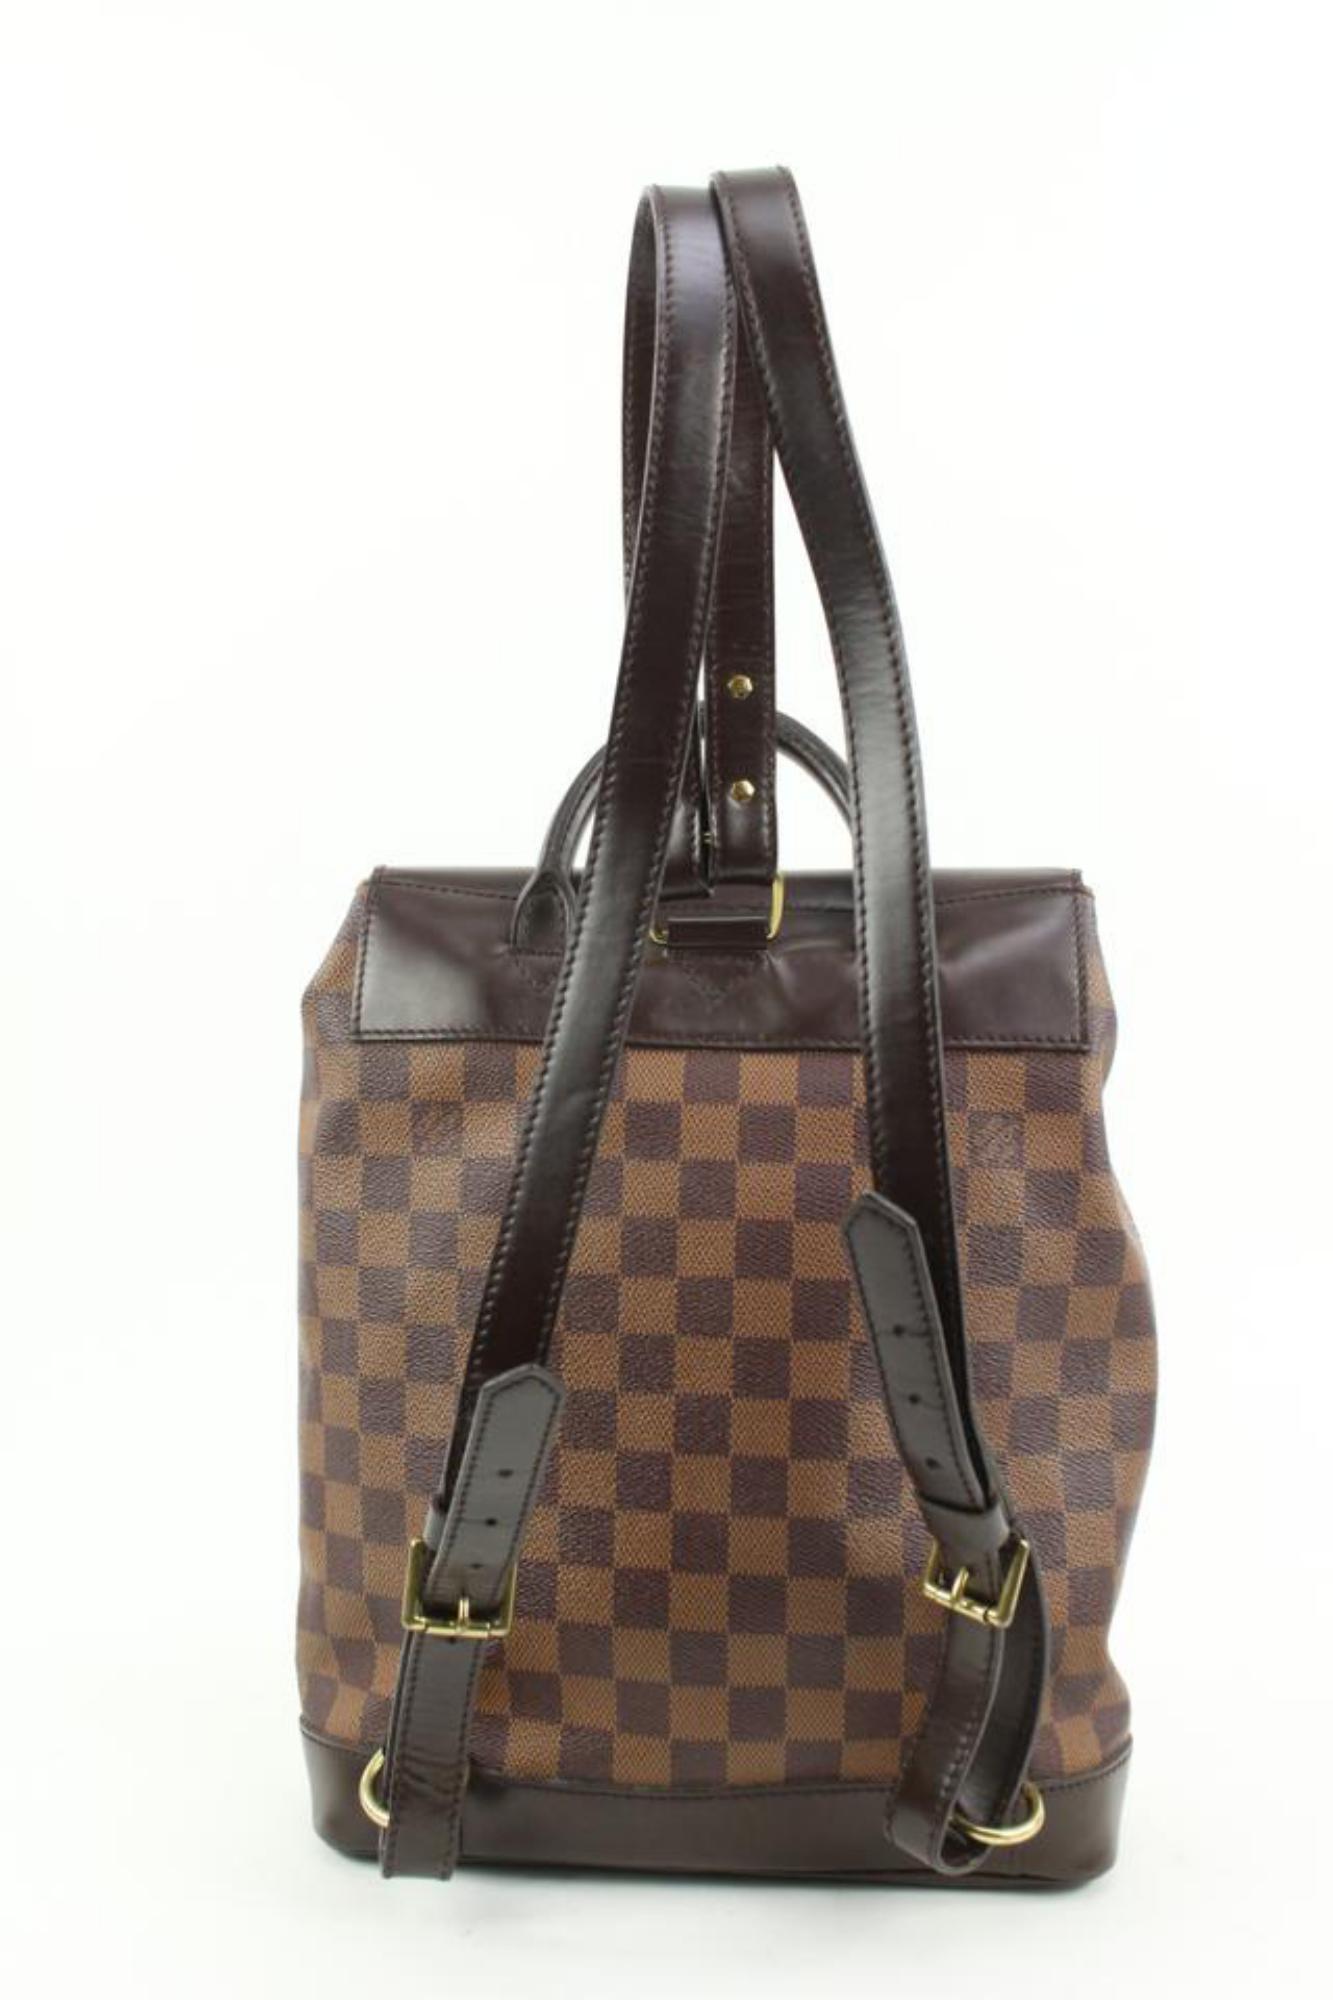 Louis Vuitton Damier Ebene Soho Backpack s210lv61 In Good Condition For Sale In Dix hills, NY